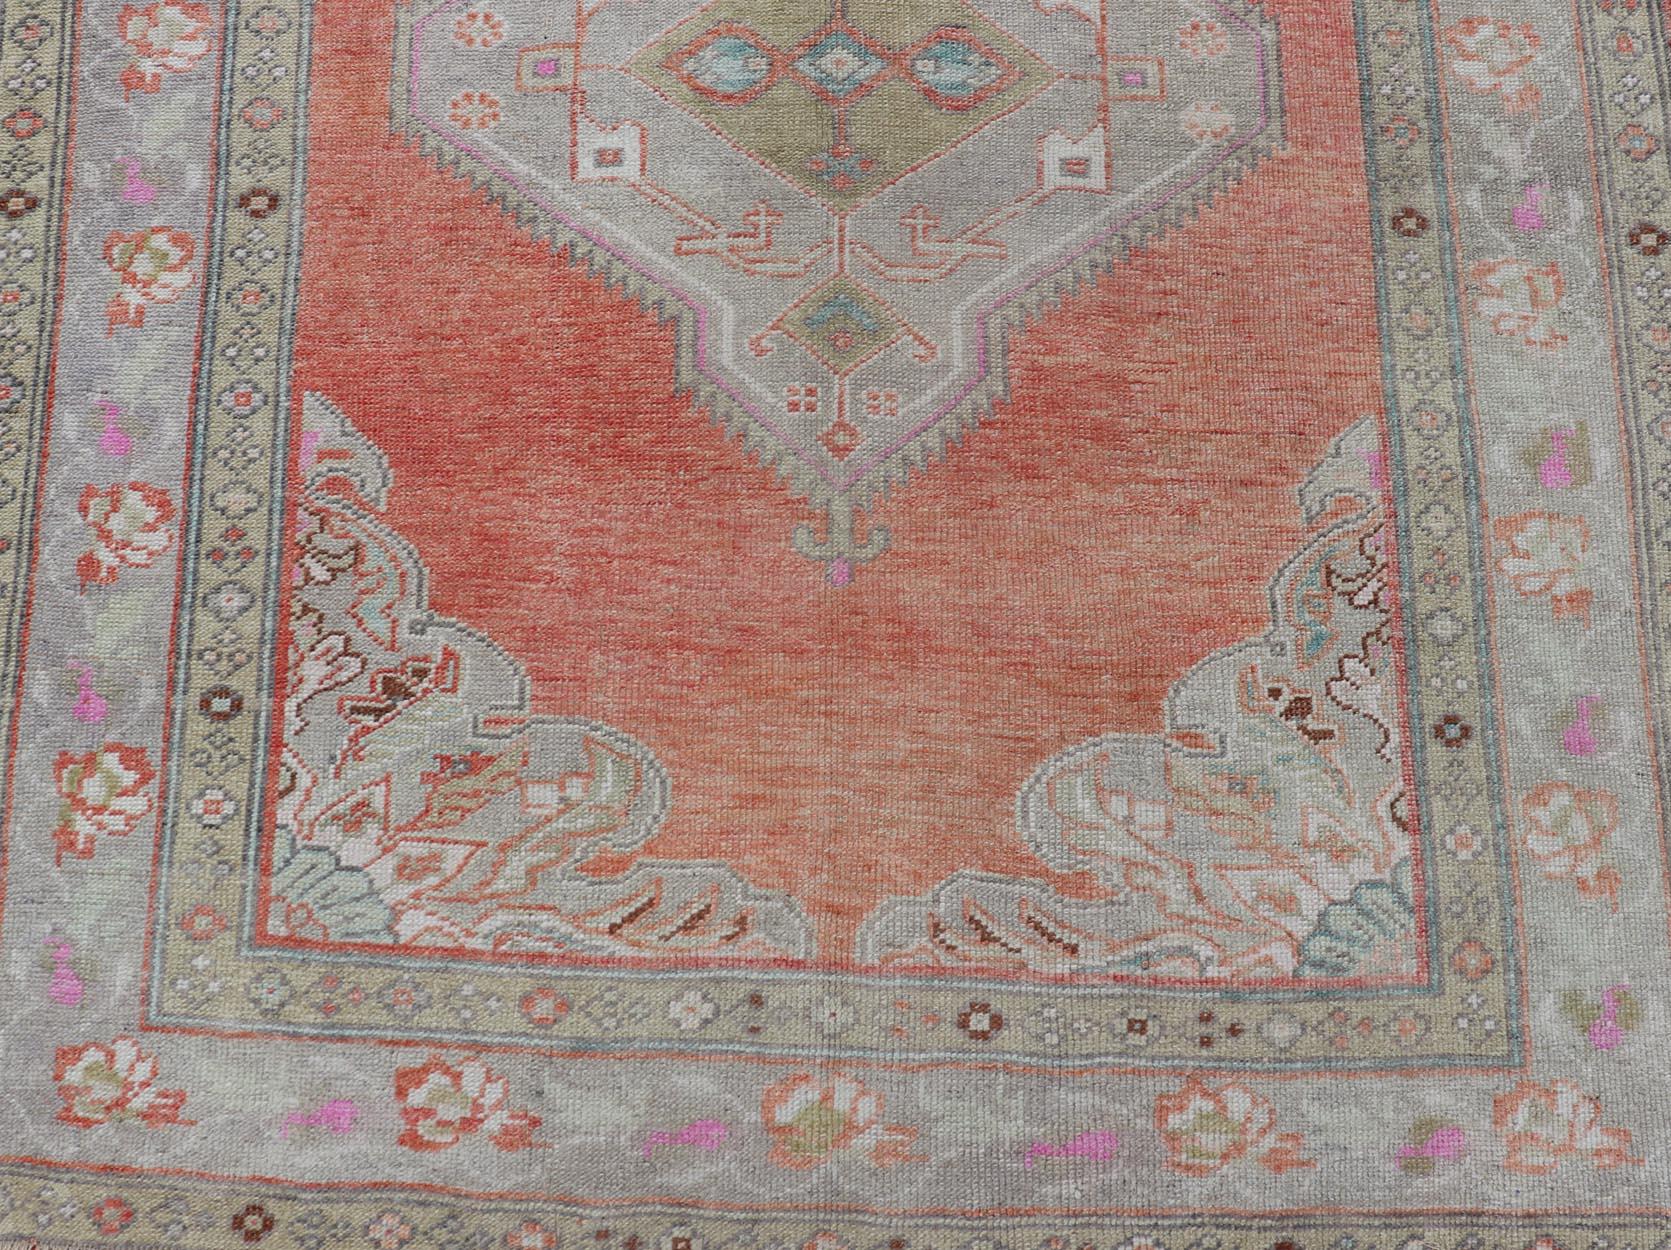 Vintage Turkish Oushak Gallery Runner in Coral, Grey, Green, Lavender, Yellow In Excellent Condition For Sale In Atlanta, GA